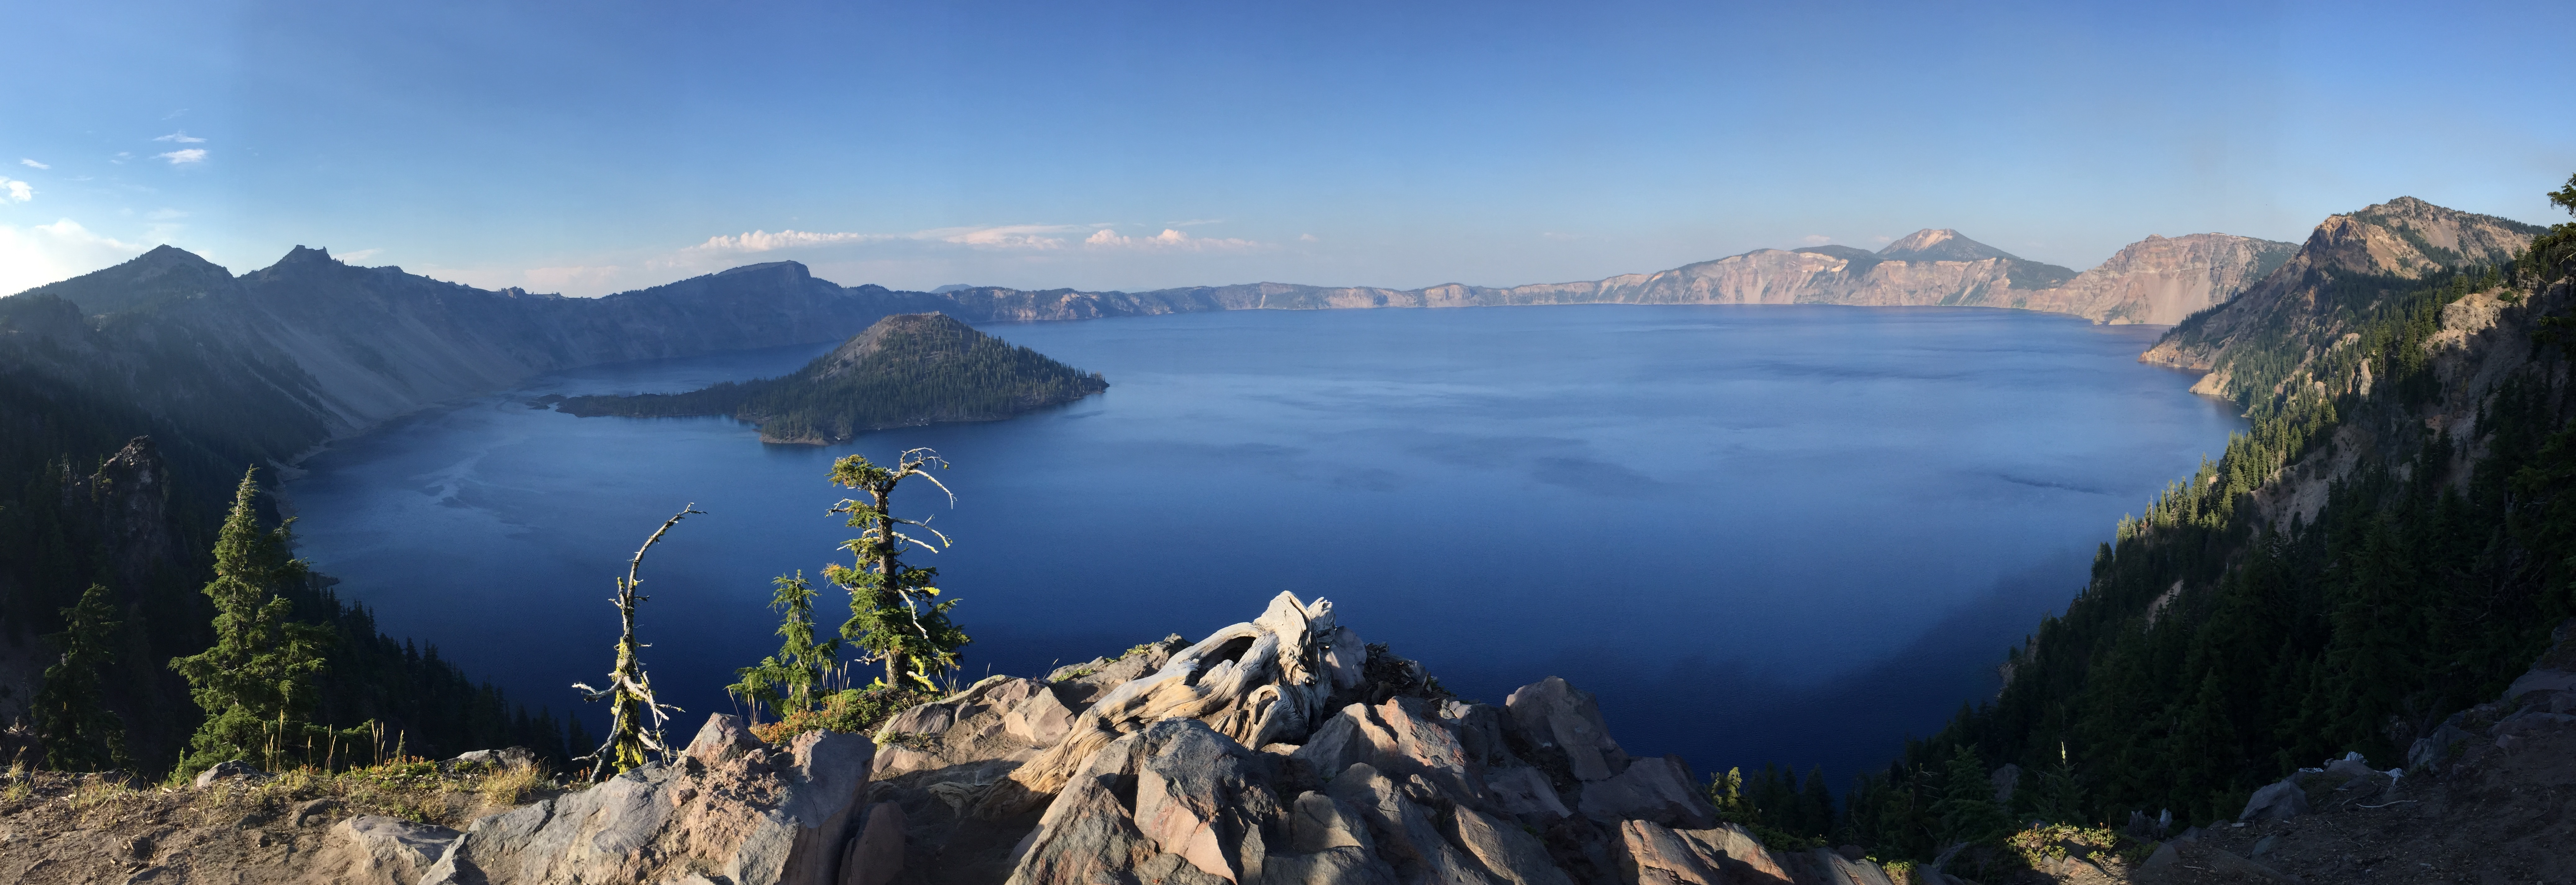 Day 126: Crater Lake, and Back On the Trail